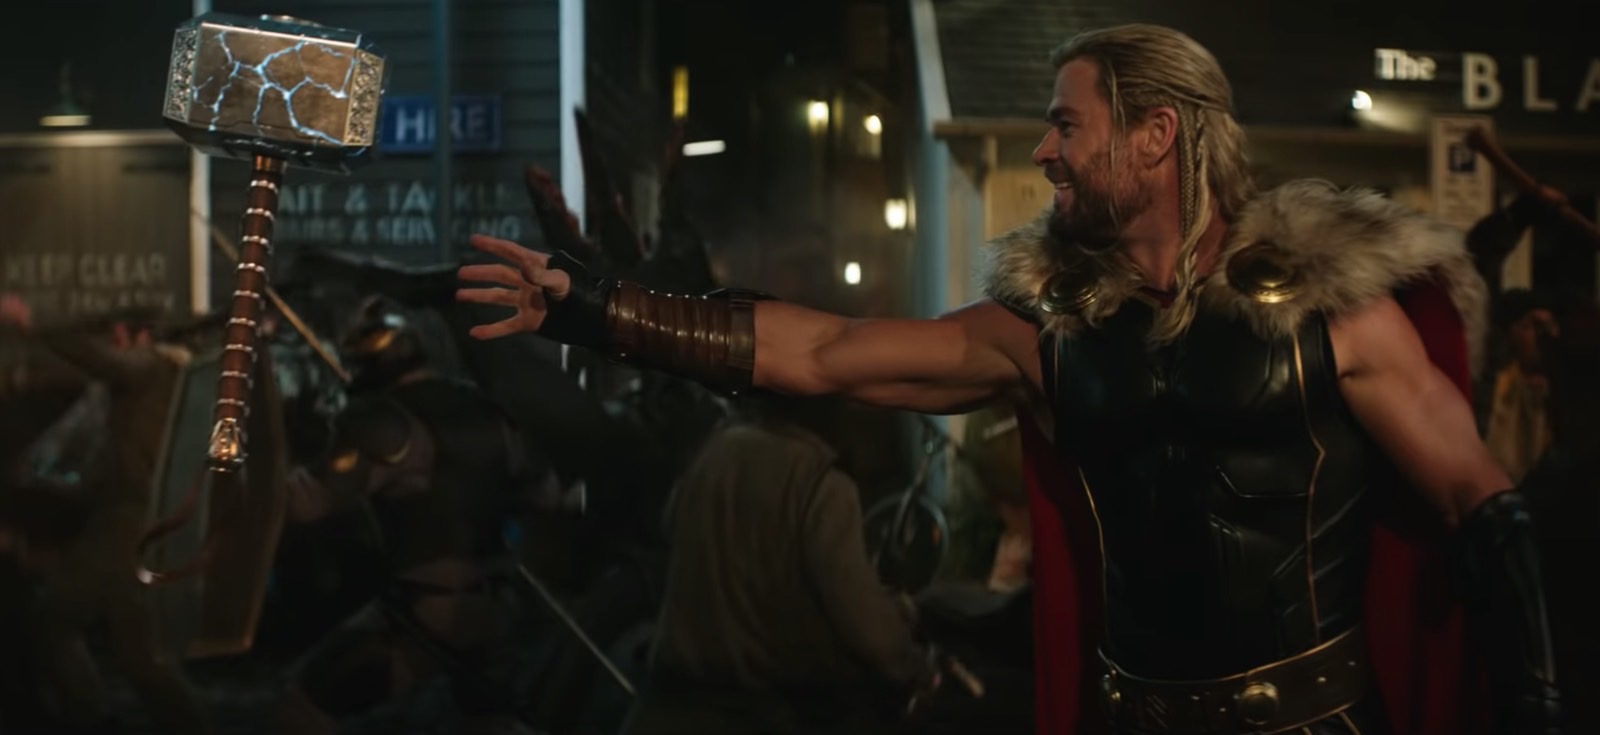 A surprised and excited Thor (Chris Hemsworth) foolishly believing he can get Mjolnir back.